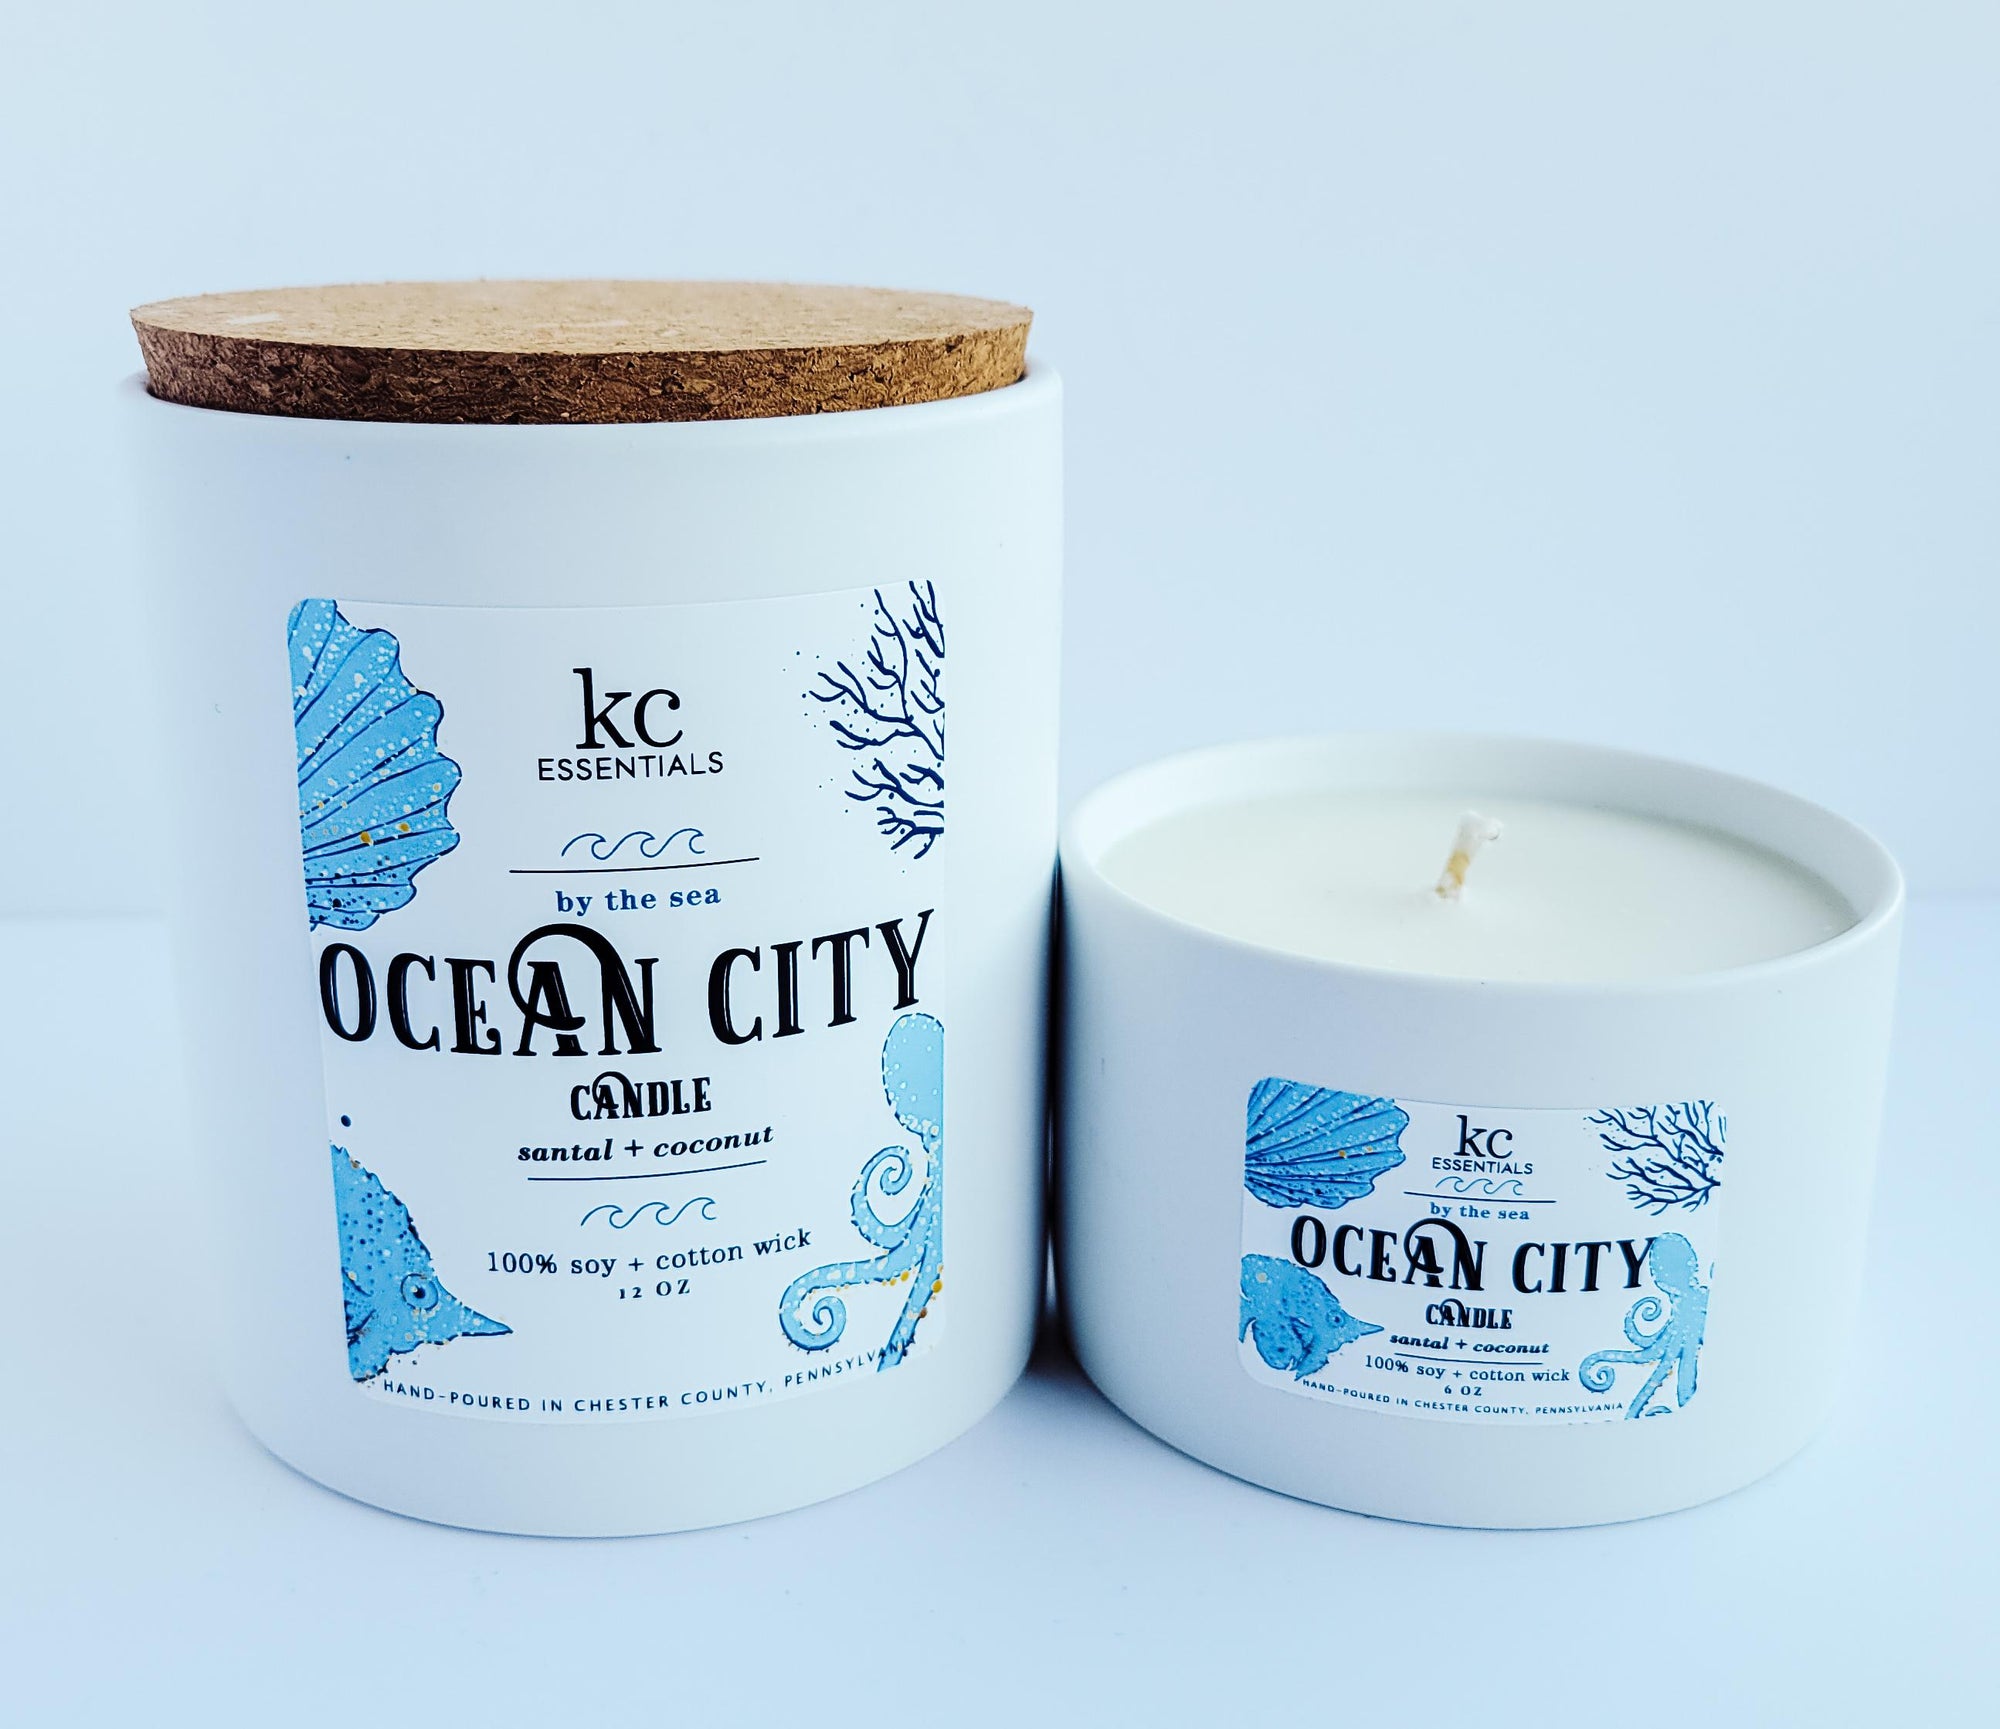 Ocean City Beach 12 ounce candle made with 100 percent soy, includes cork lid.